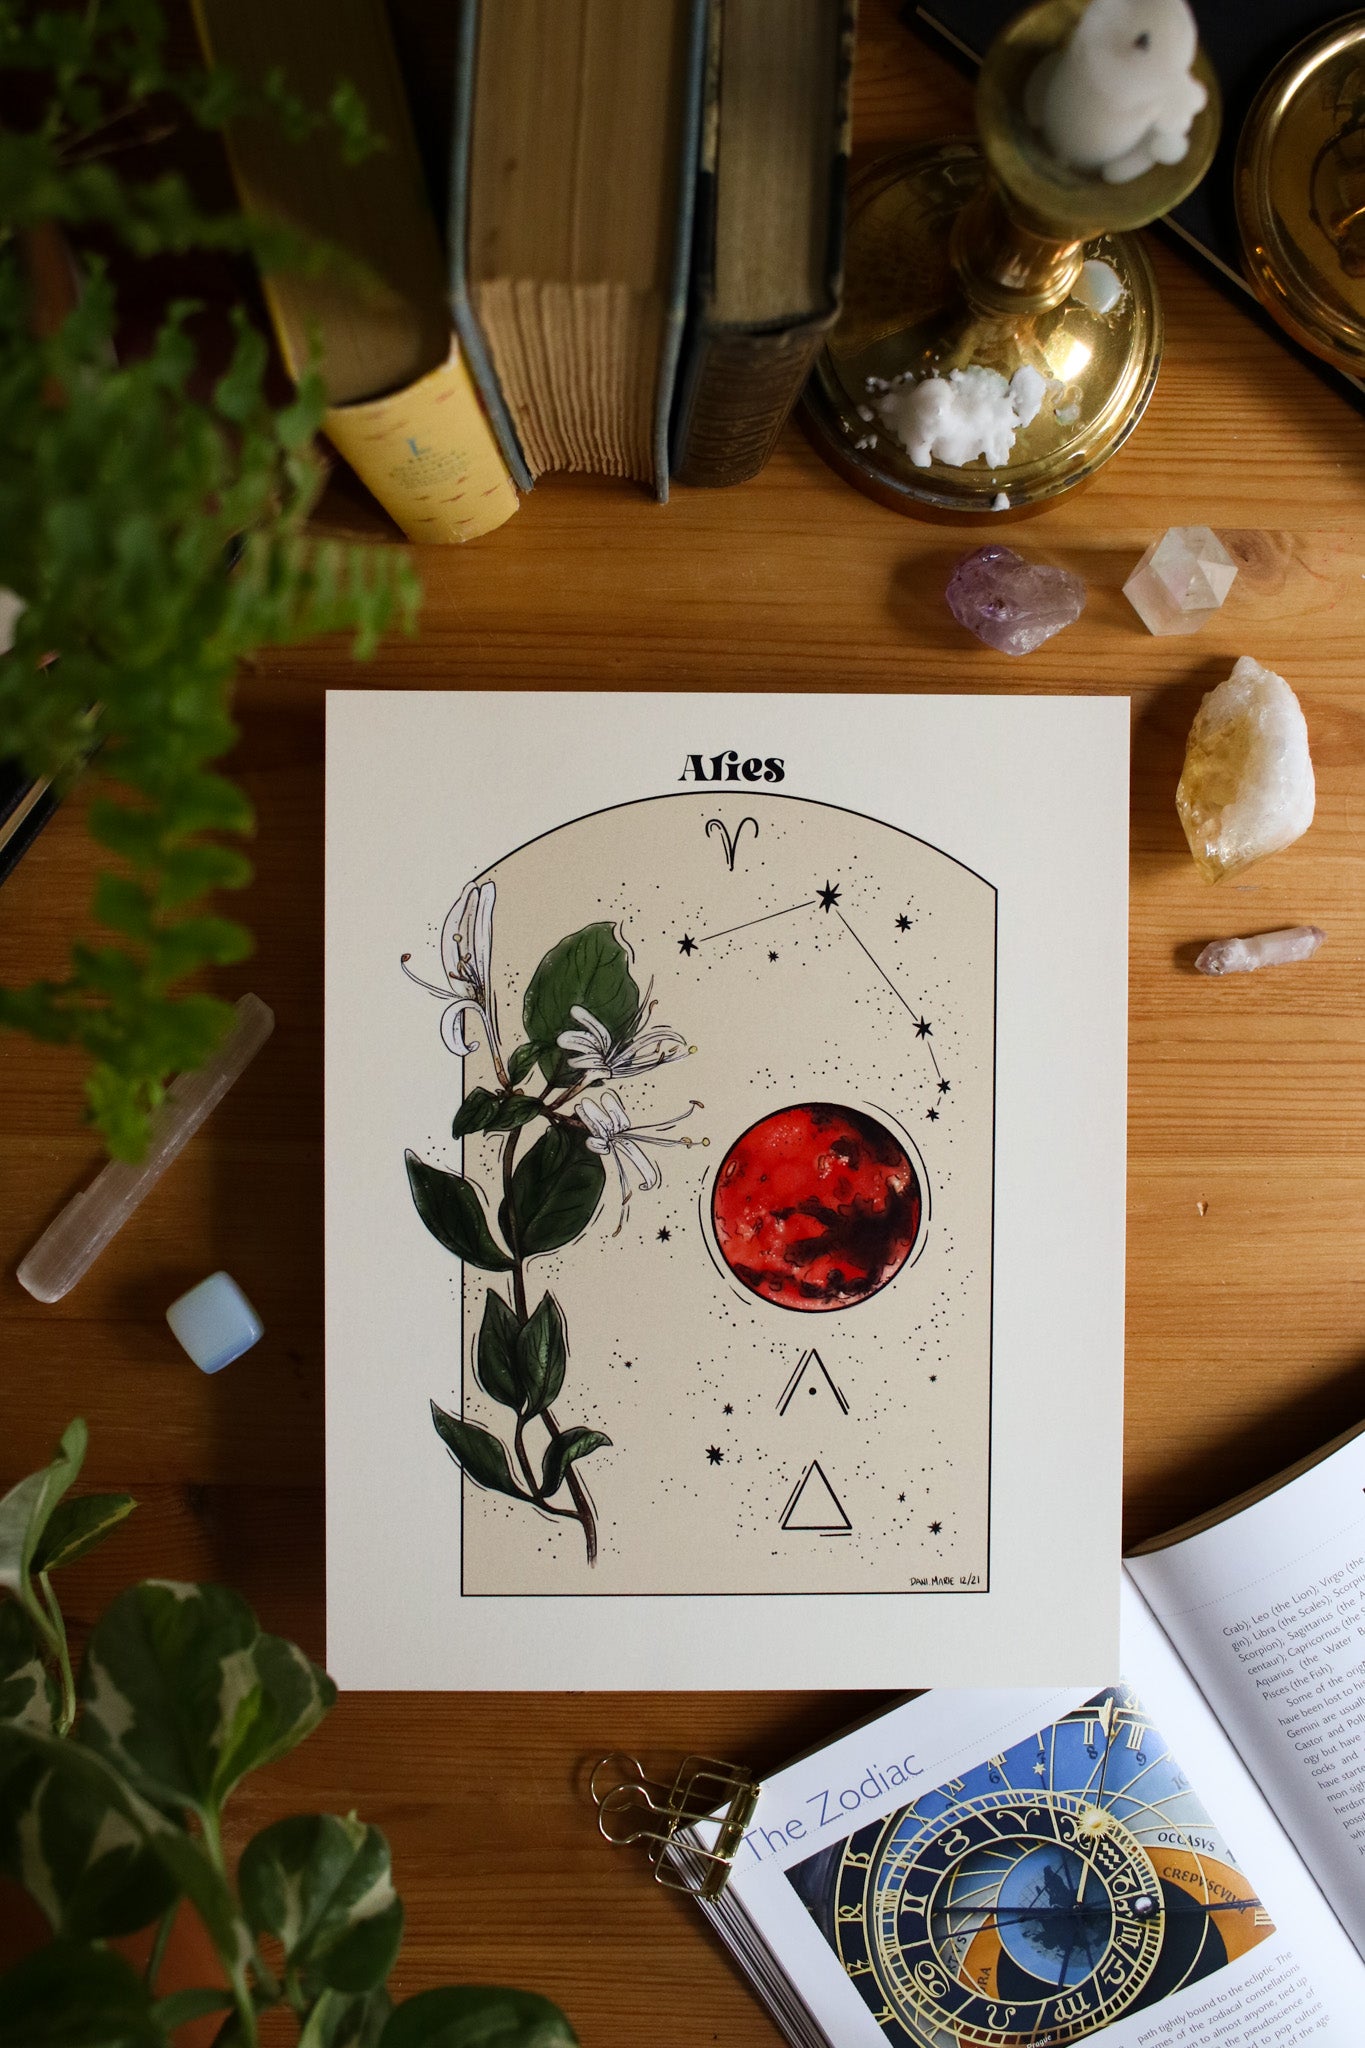 Aries - Astrology Infographic